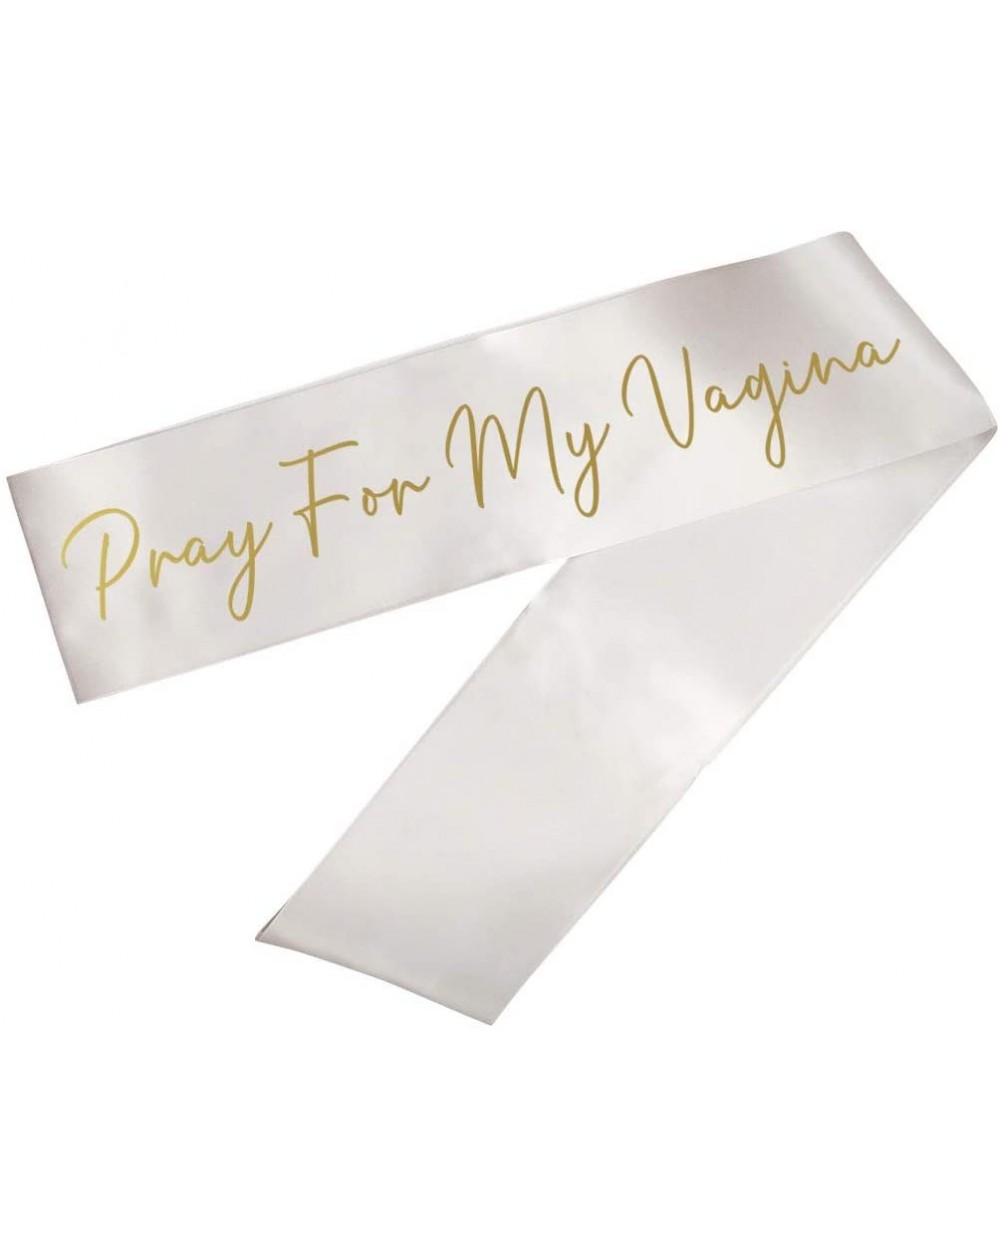 Favors Baby Shower Party Sash- Pray for My Vagina- Gold Foil Text- Satin White Ribbon- Includes Diamond Pin - Vagina - CM19GD...